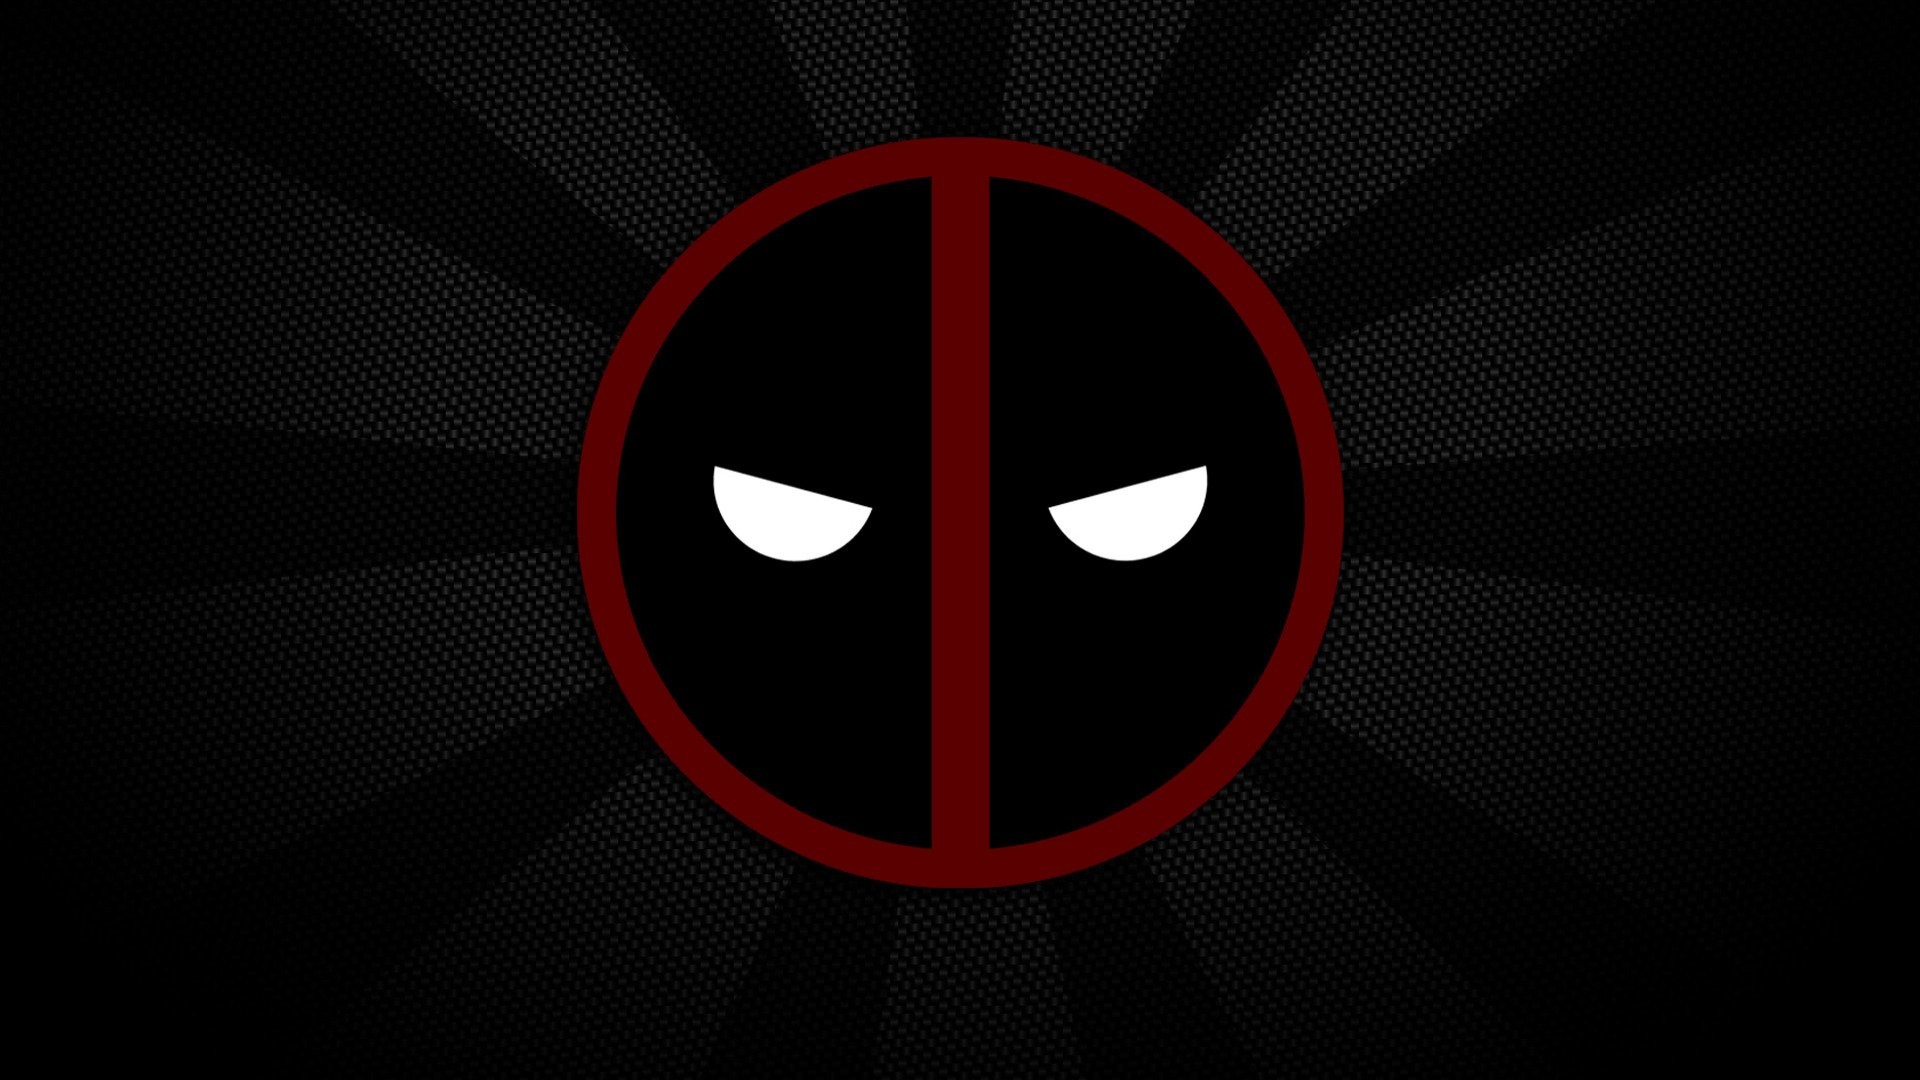 Undefined Deadpool Wallpaper 42 Wallpapers Adorable Wallpapers 1920x1080